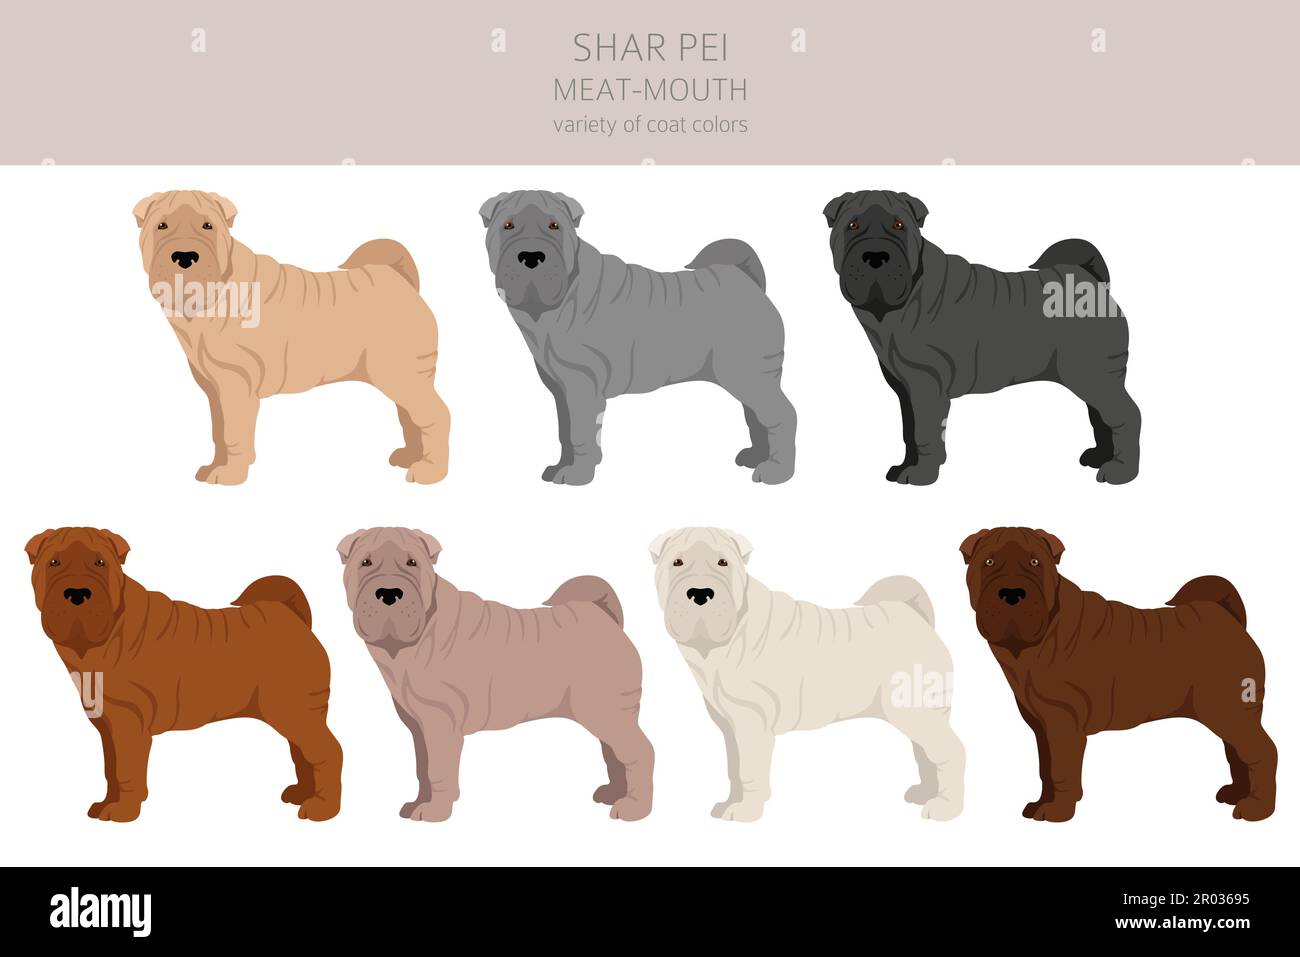 Shar Pei (modern) meat mouth clipart. Different poses, coat colors set.  Vector illustration Stock Vector